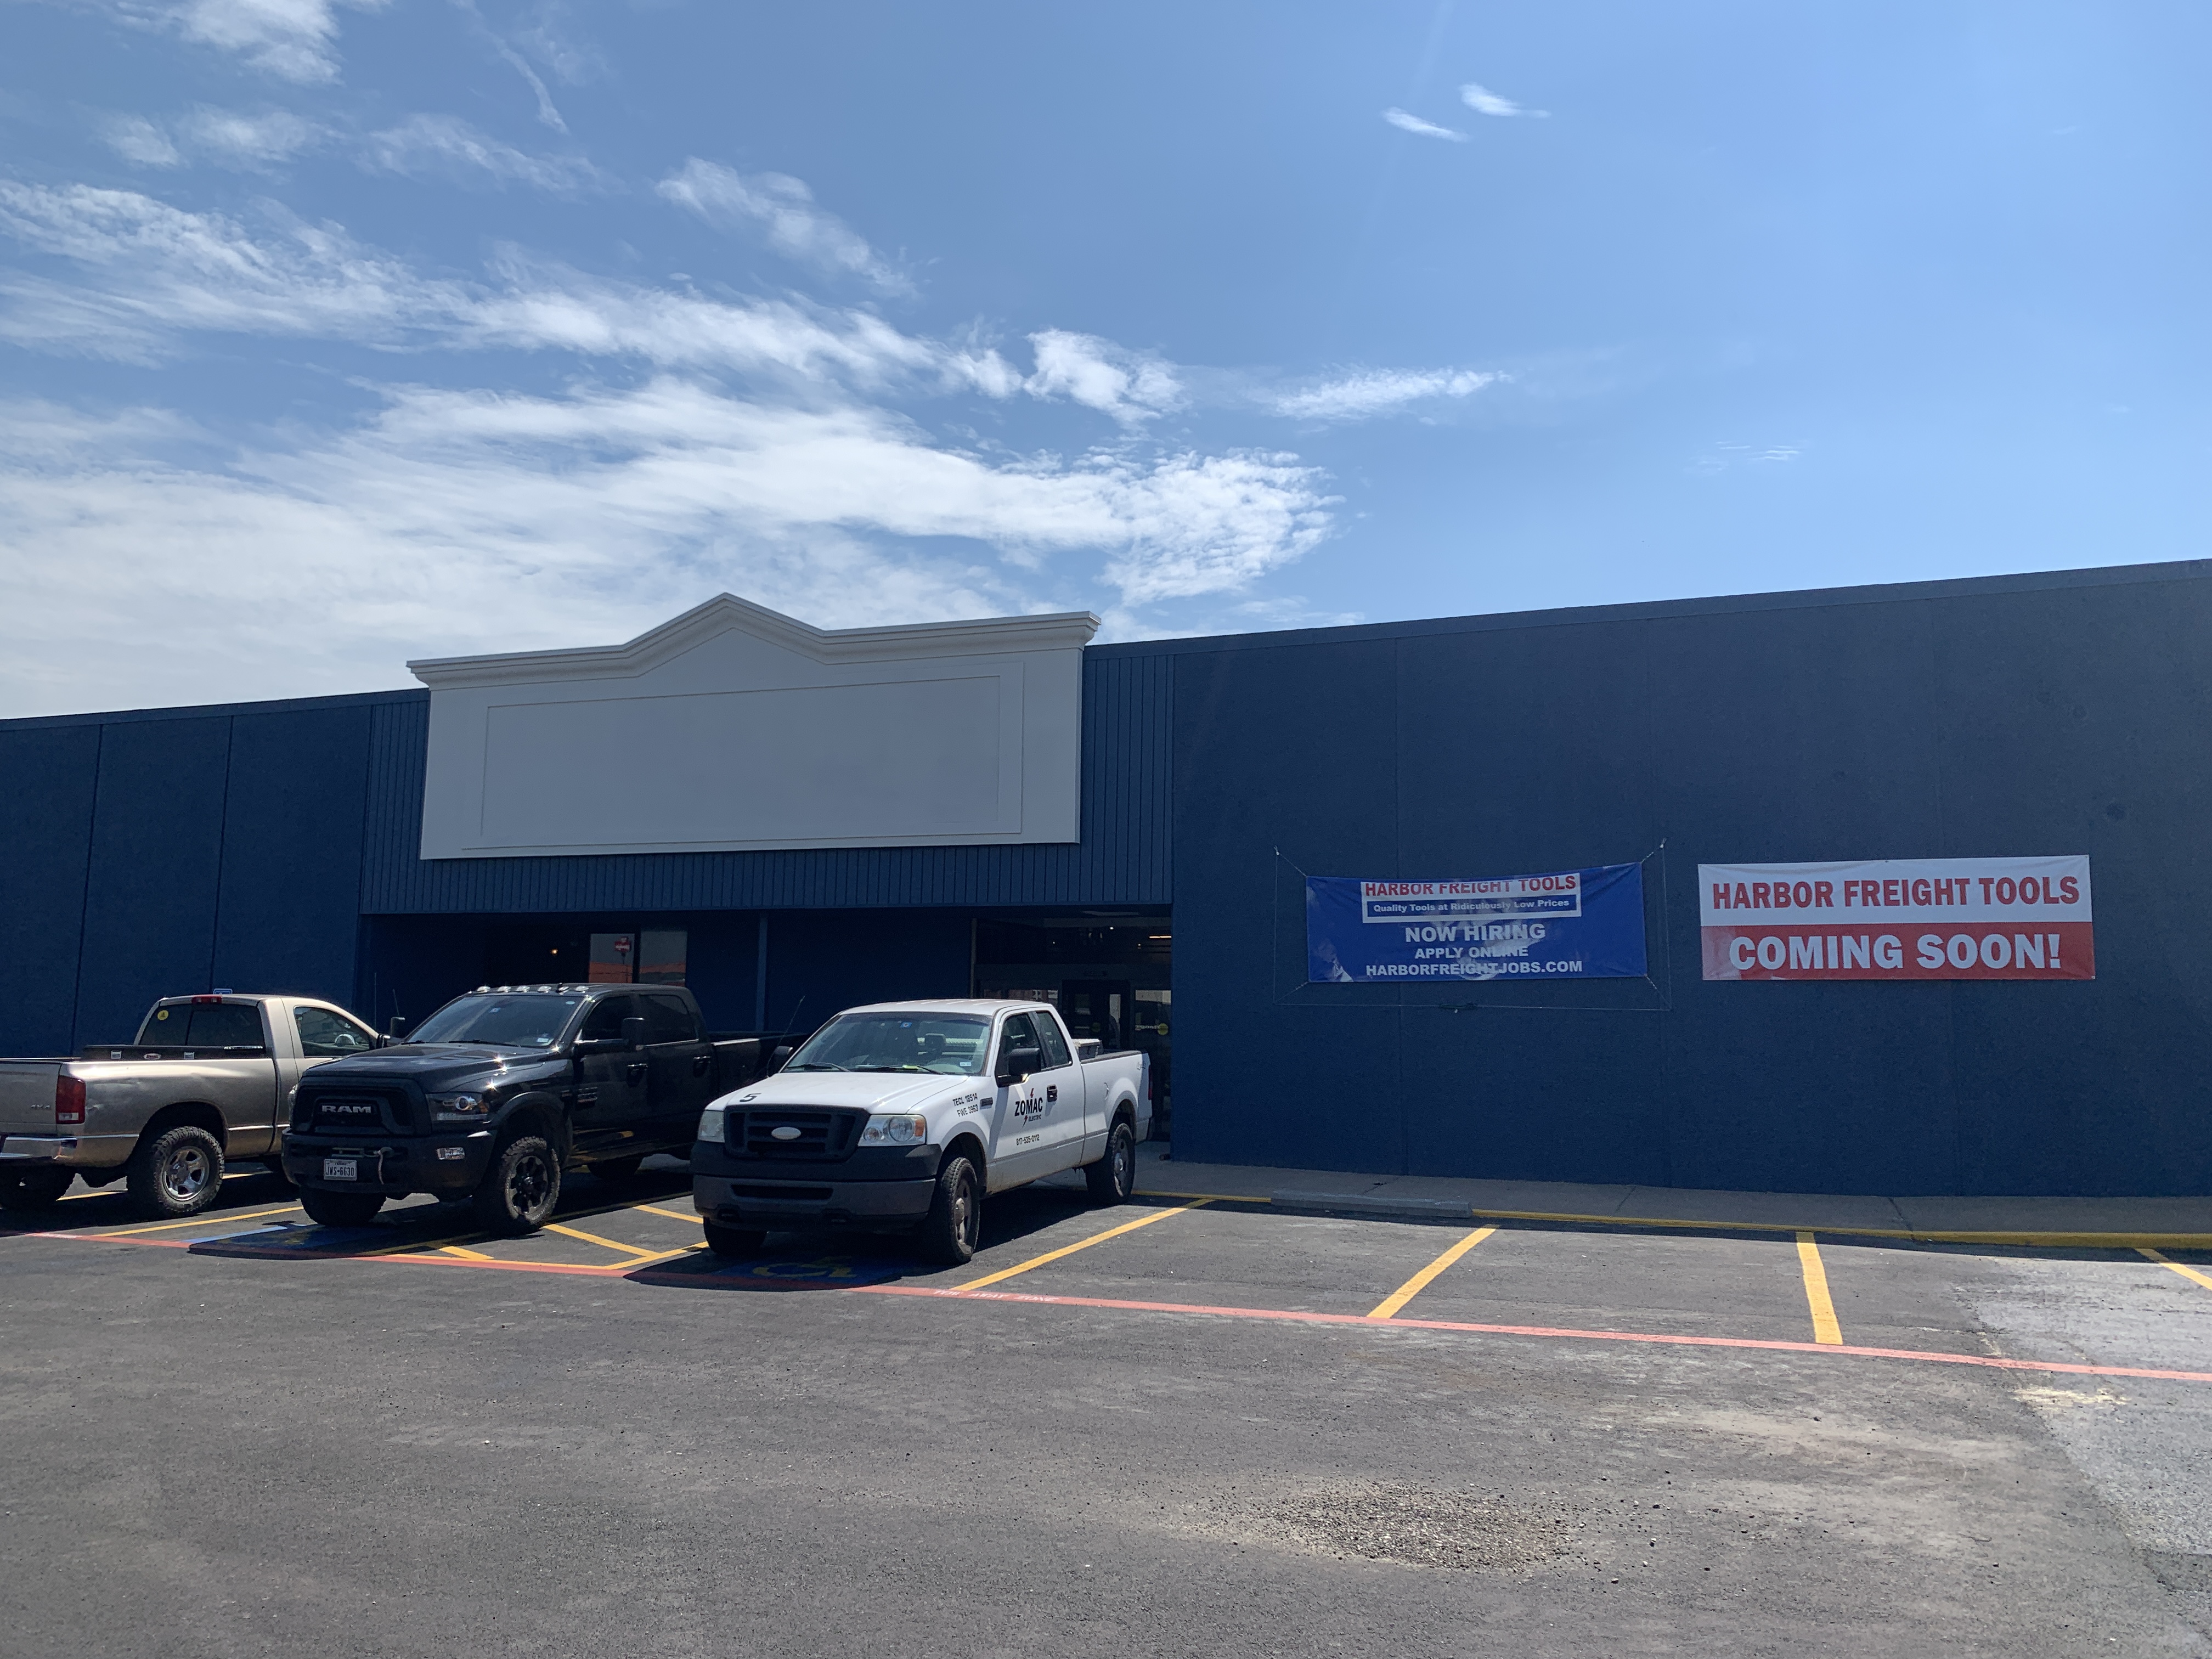 Harbor Freight Tools in Sulphur Springs Scheduled to Open June 30th